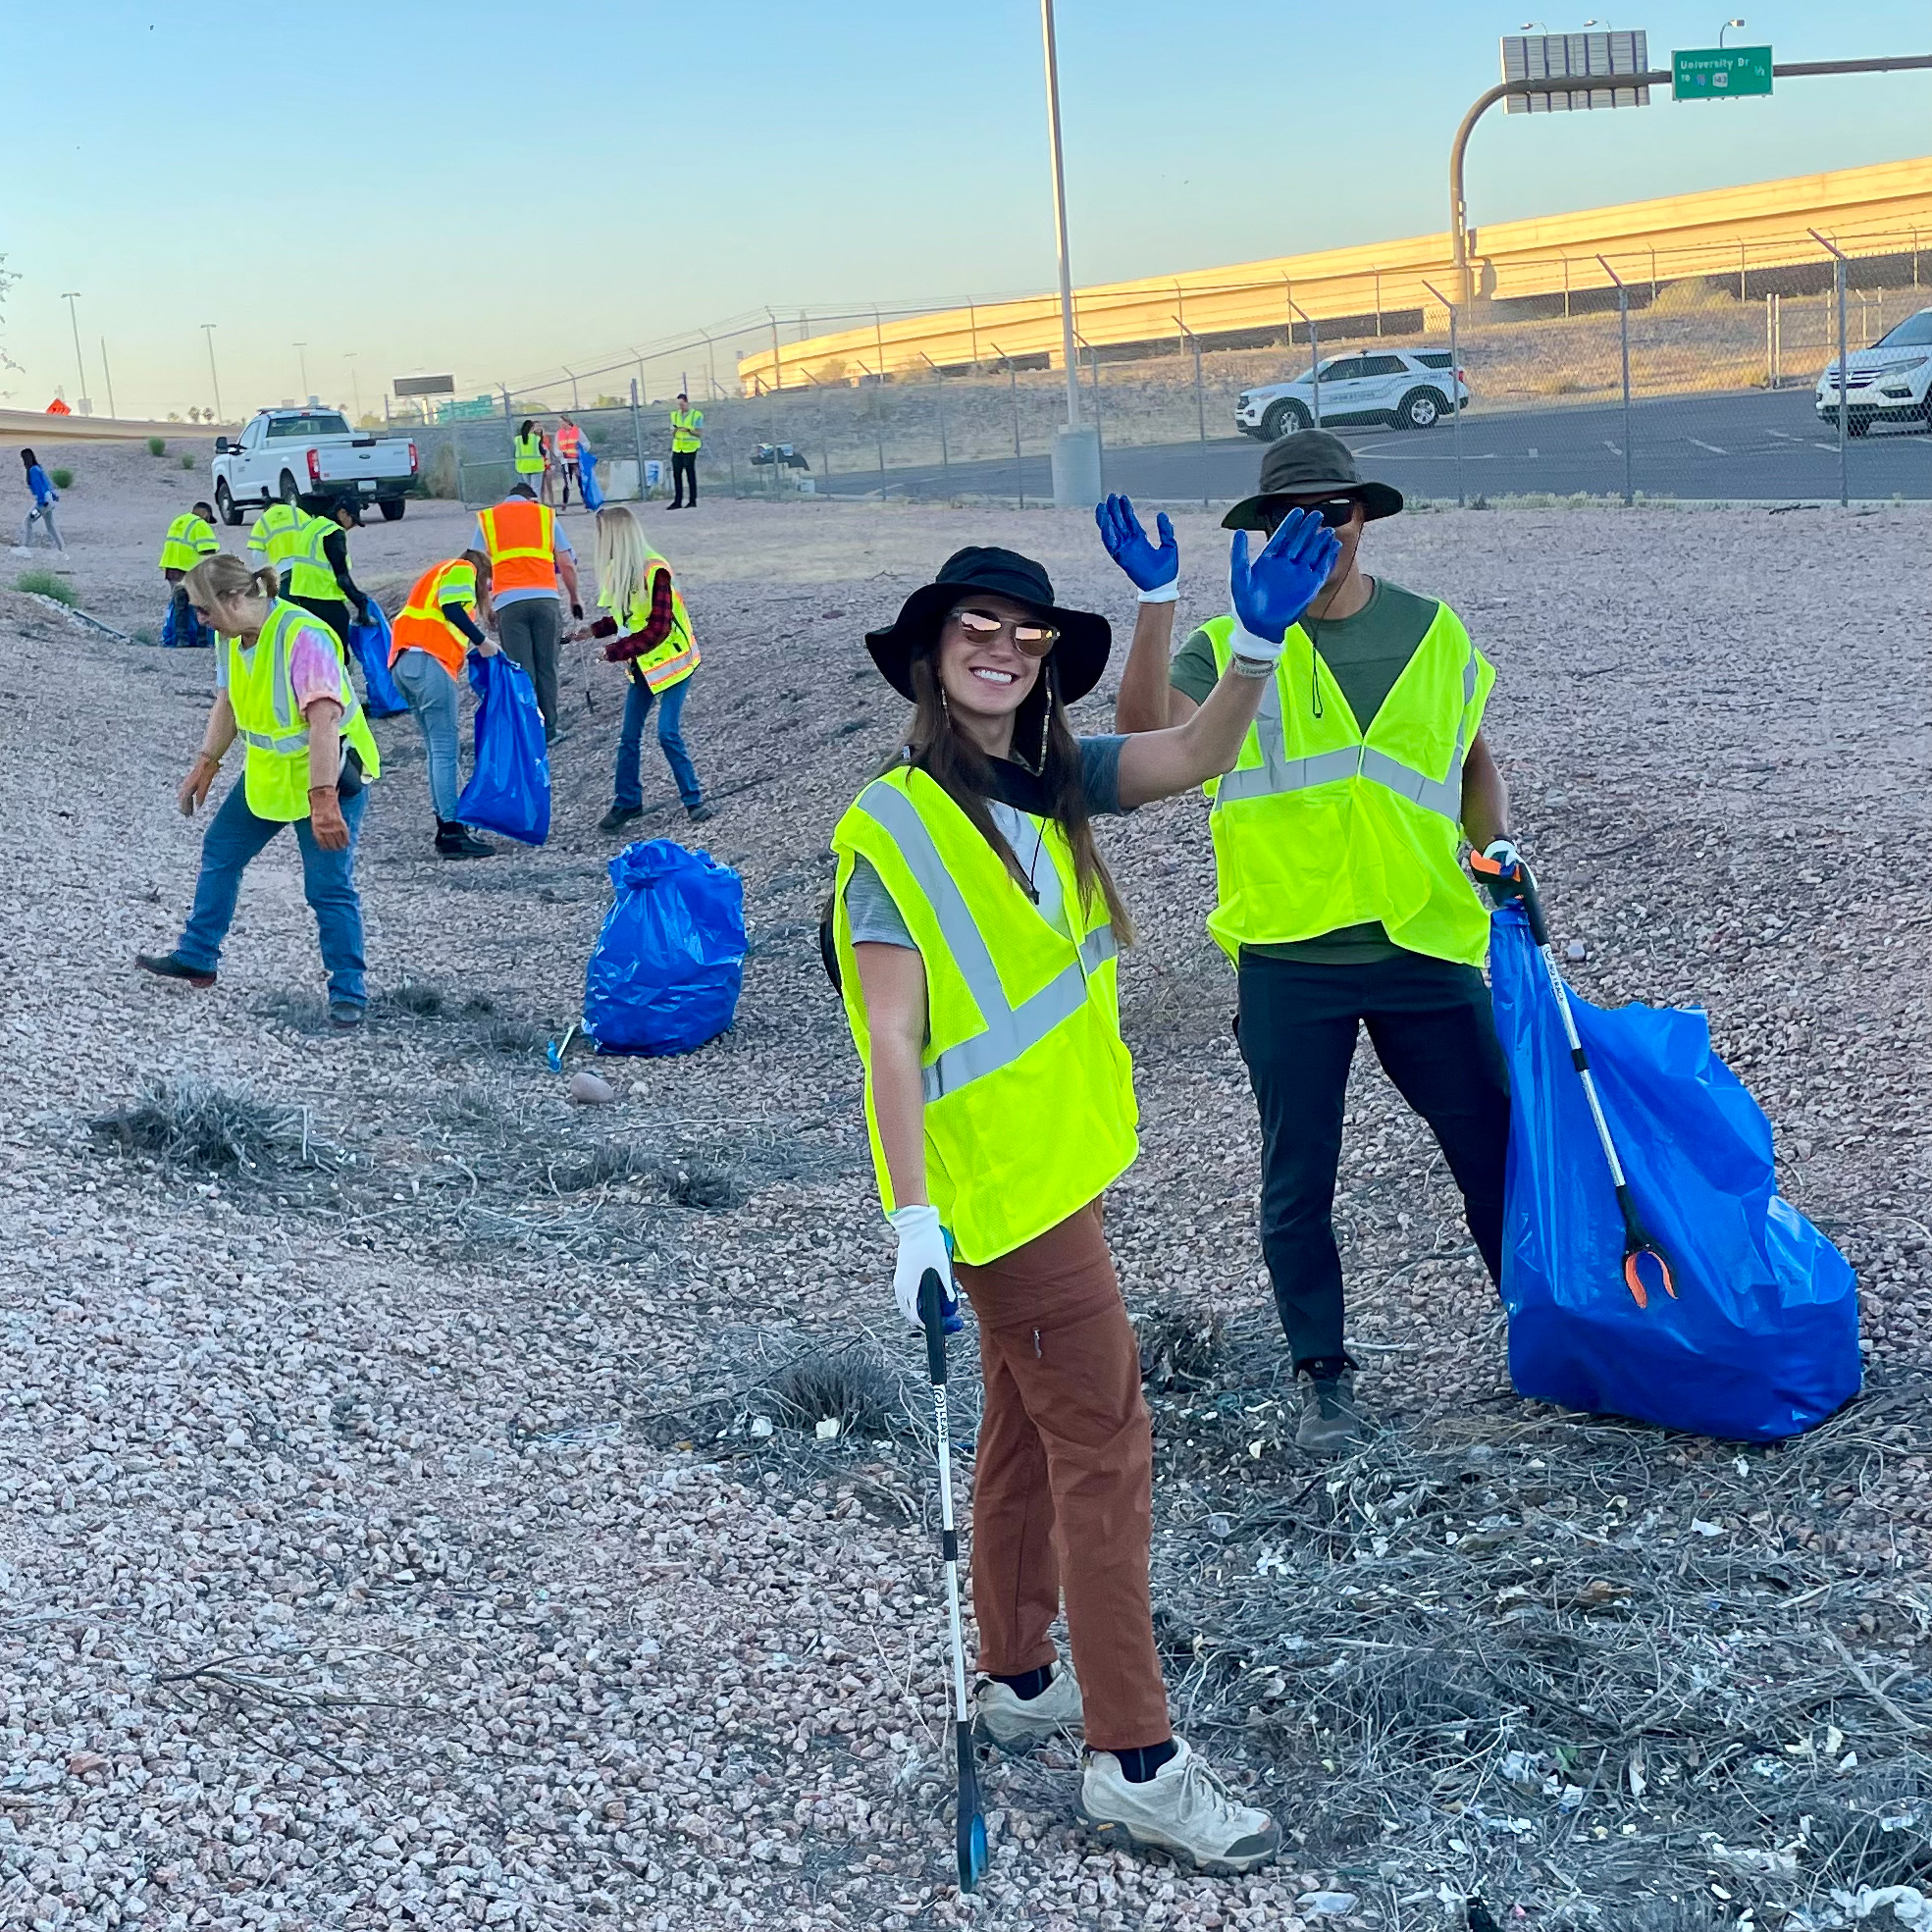 A group of volunteers pick up litter near a highway.